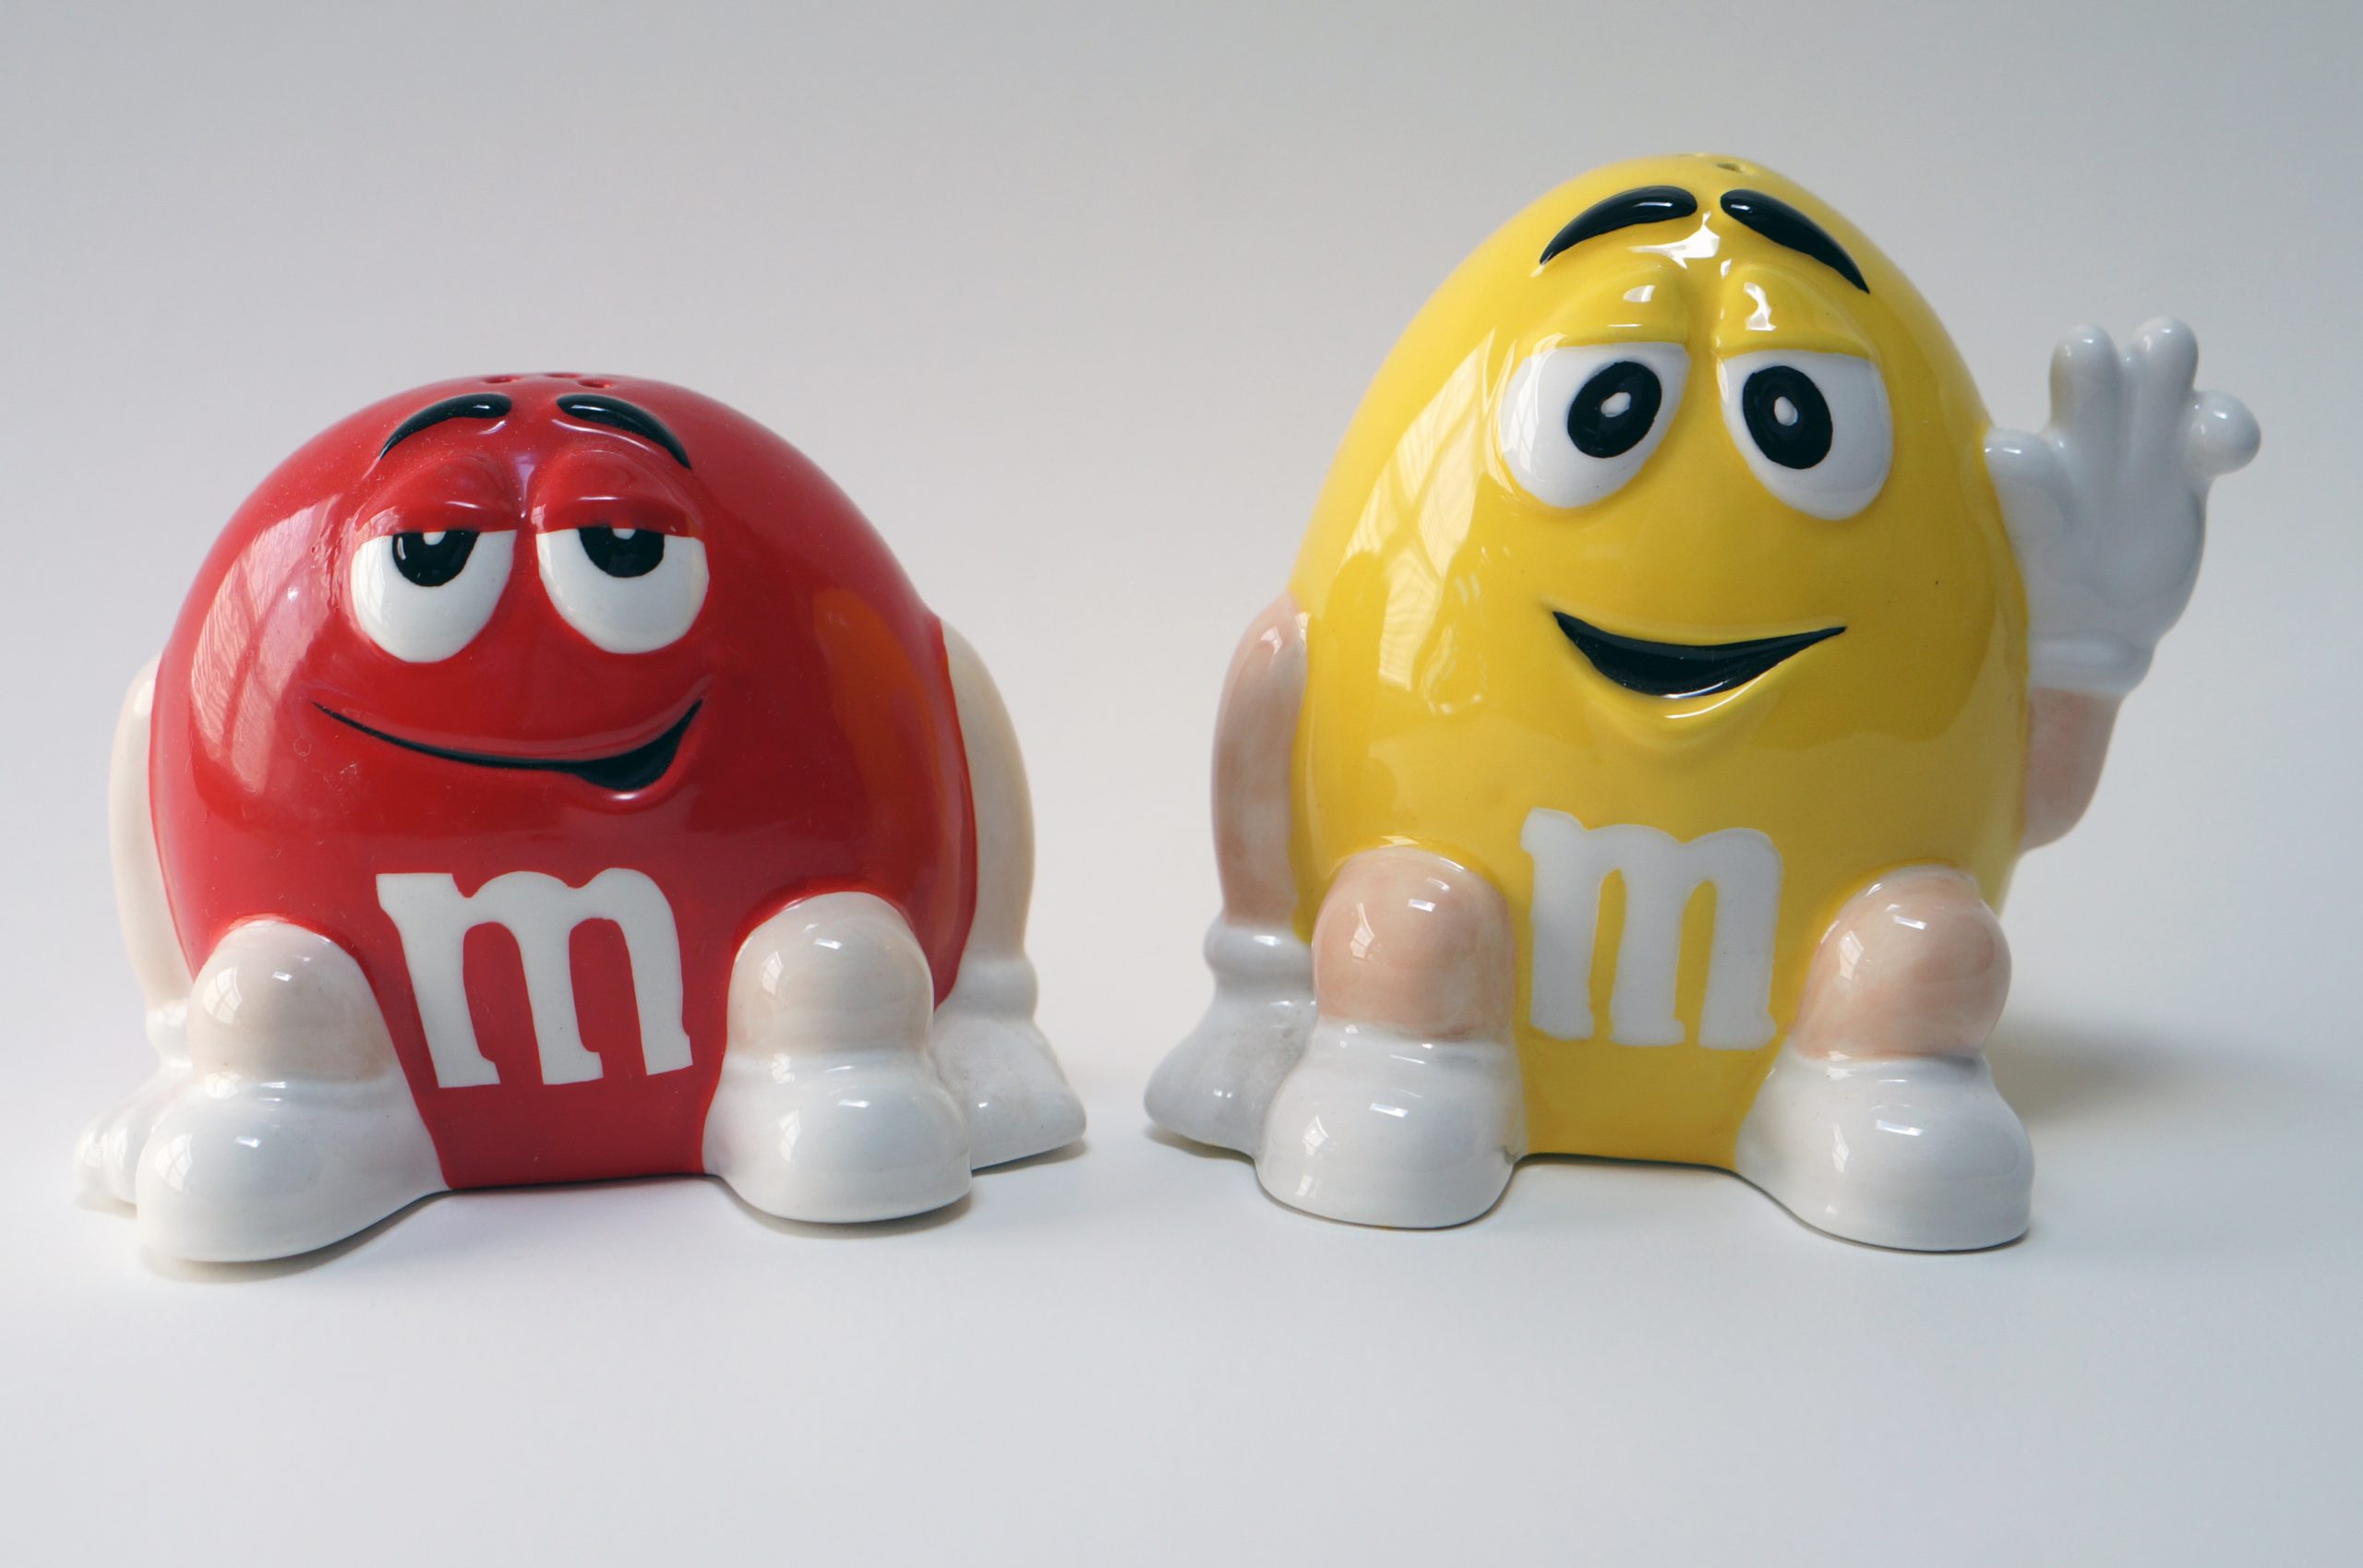 Vintage Red M&ms Toy Character. 